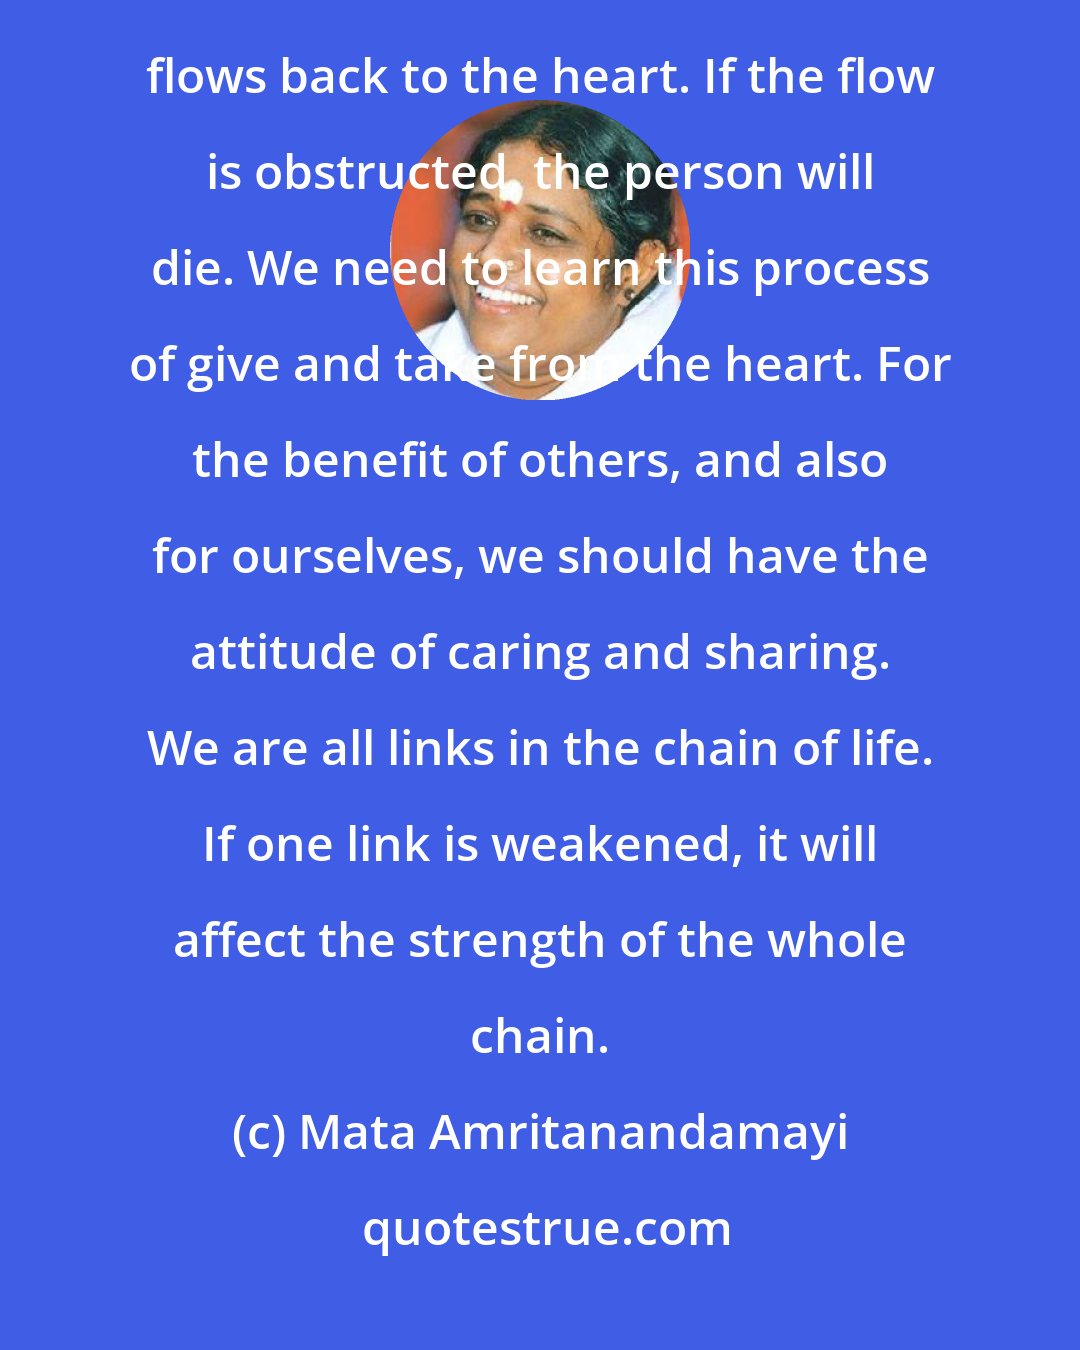 Mata Amritanandamayi: The heart sends blood to every cell of the body, and in this way the cells are nourished. The same blood then flows back to the heart. If the flow is obstructed, the person will die. We need to learn this process of give and take from the heart. For the benefit of others, and also for ourselves, we should have the attitude of caring and sharing. We are all links in the chain of life. If one link is weakened, it will affect the strength of the whole chain.